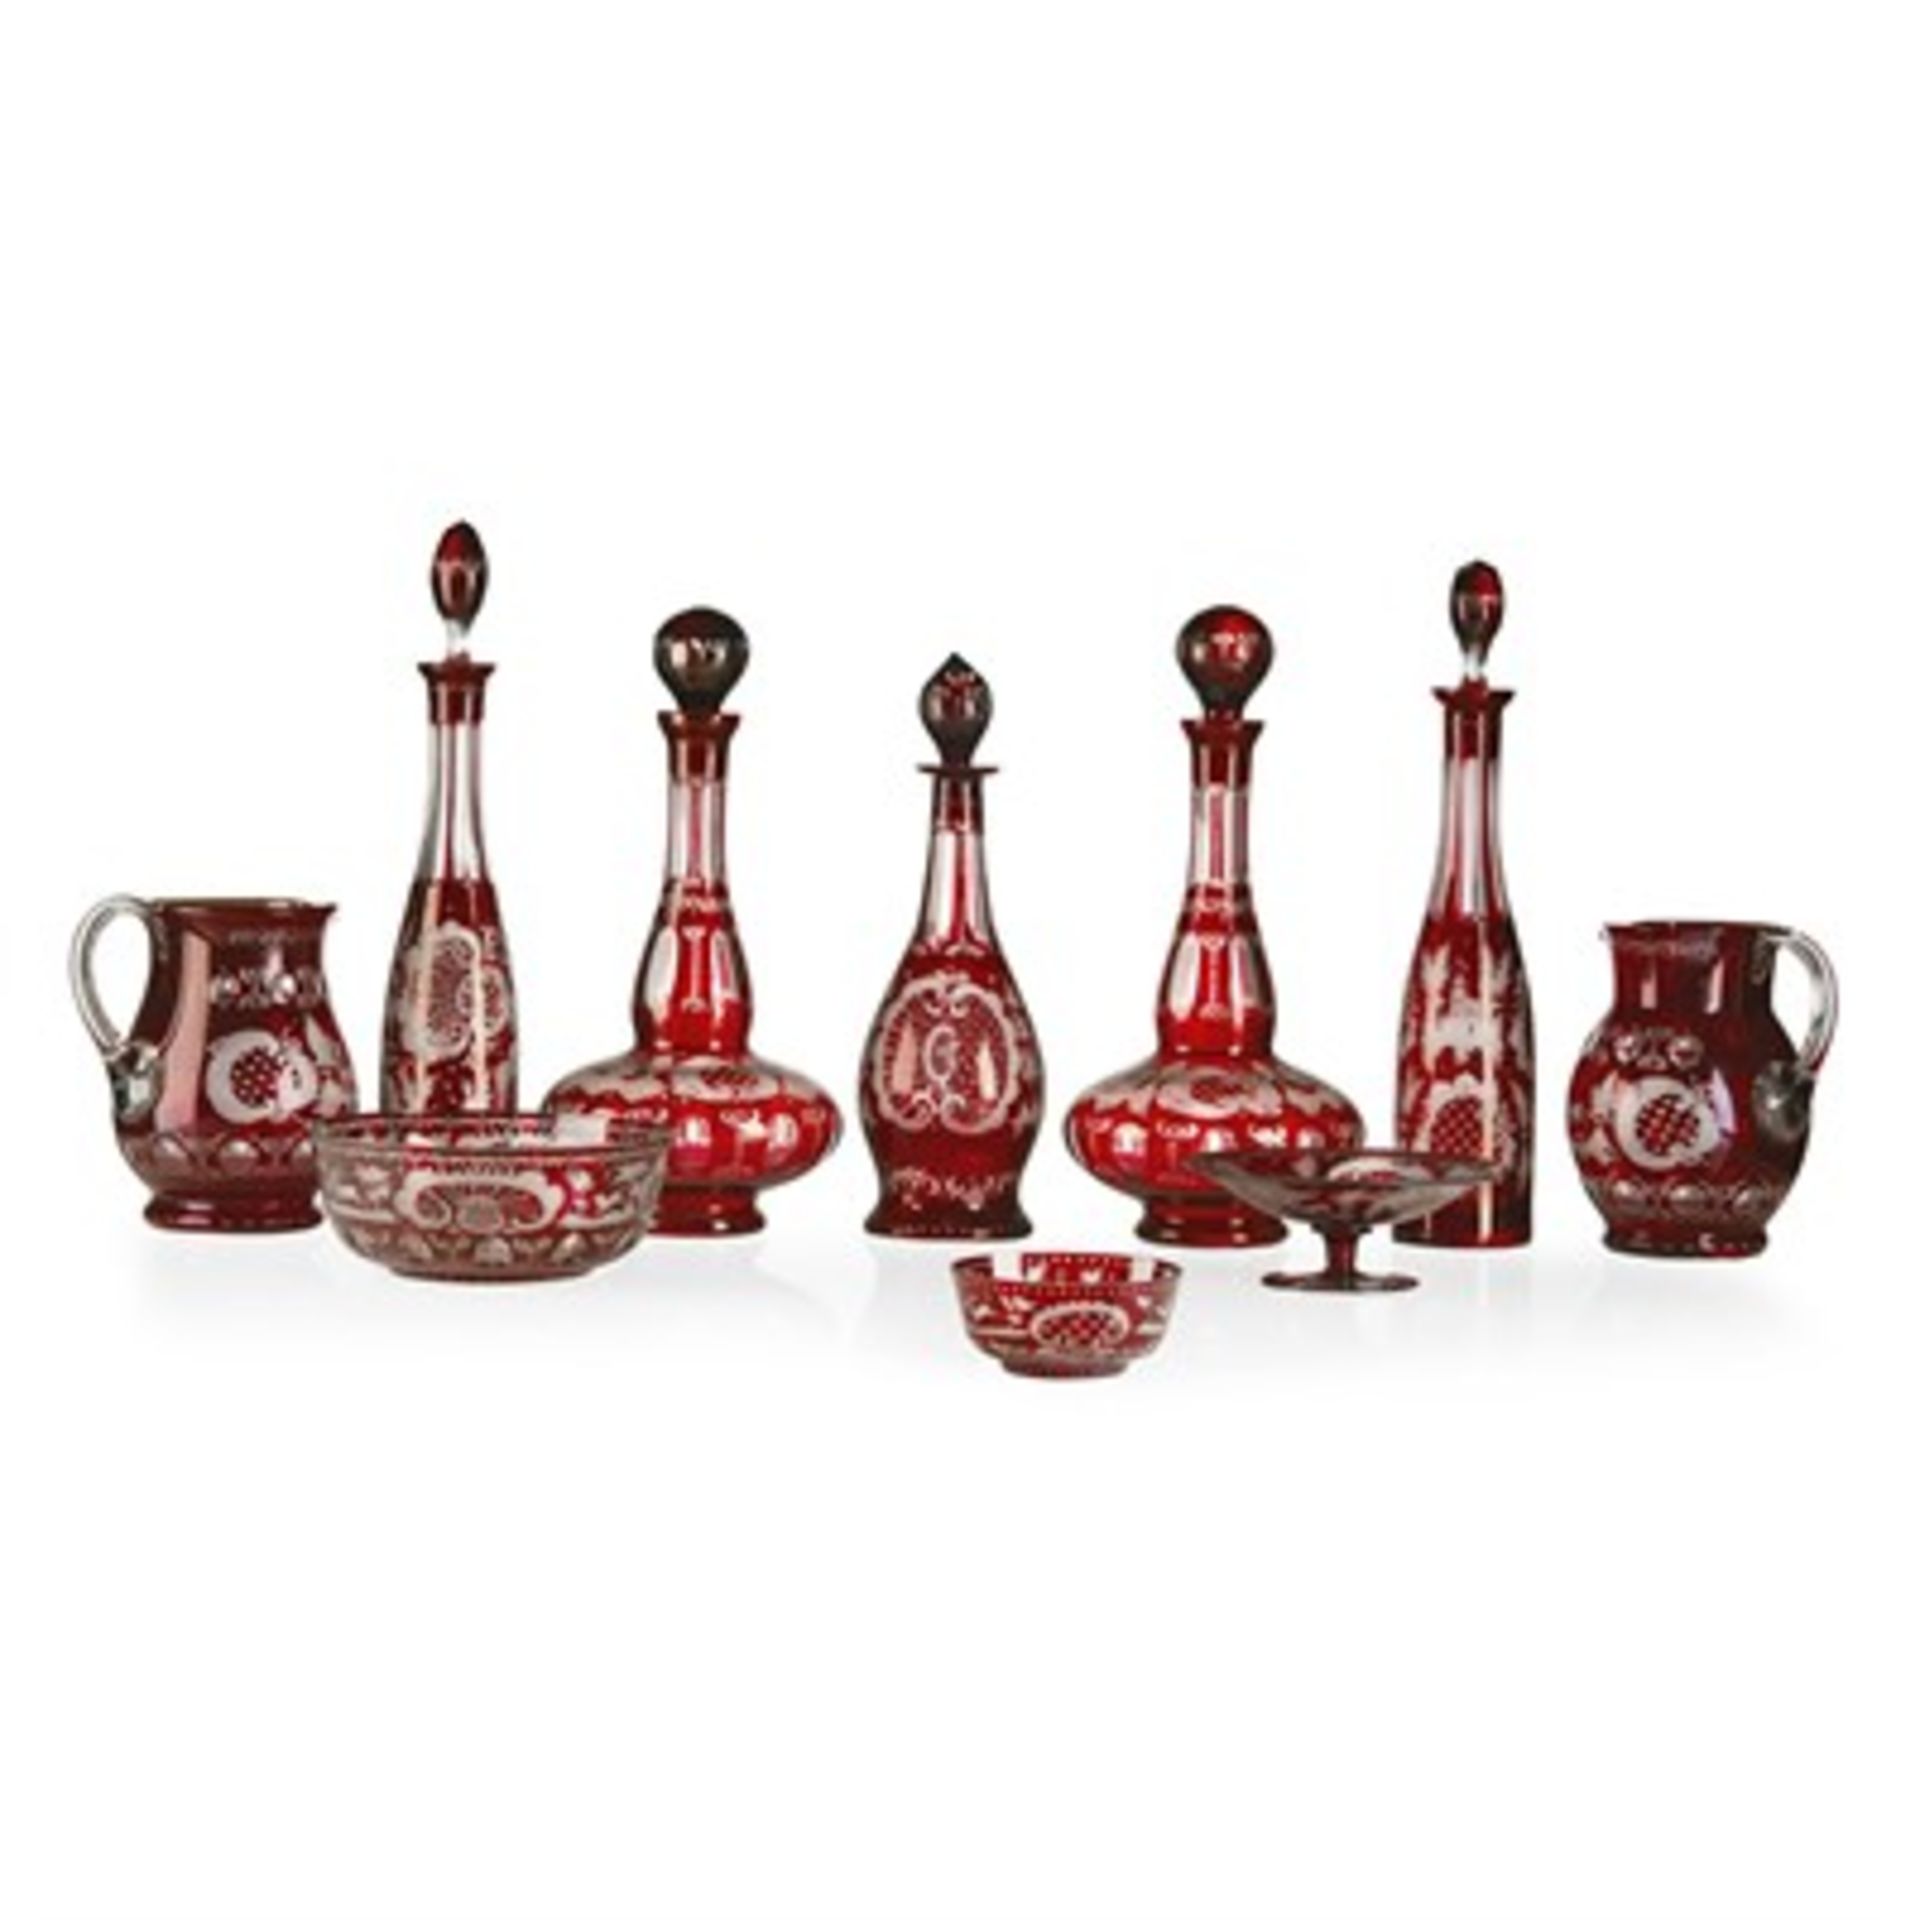 PART SUITE OF BOHEMIAN RED FLASH-CUT GLASS 19TH CENTURY with wheel-engraved cartouches, buildings,